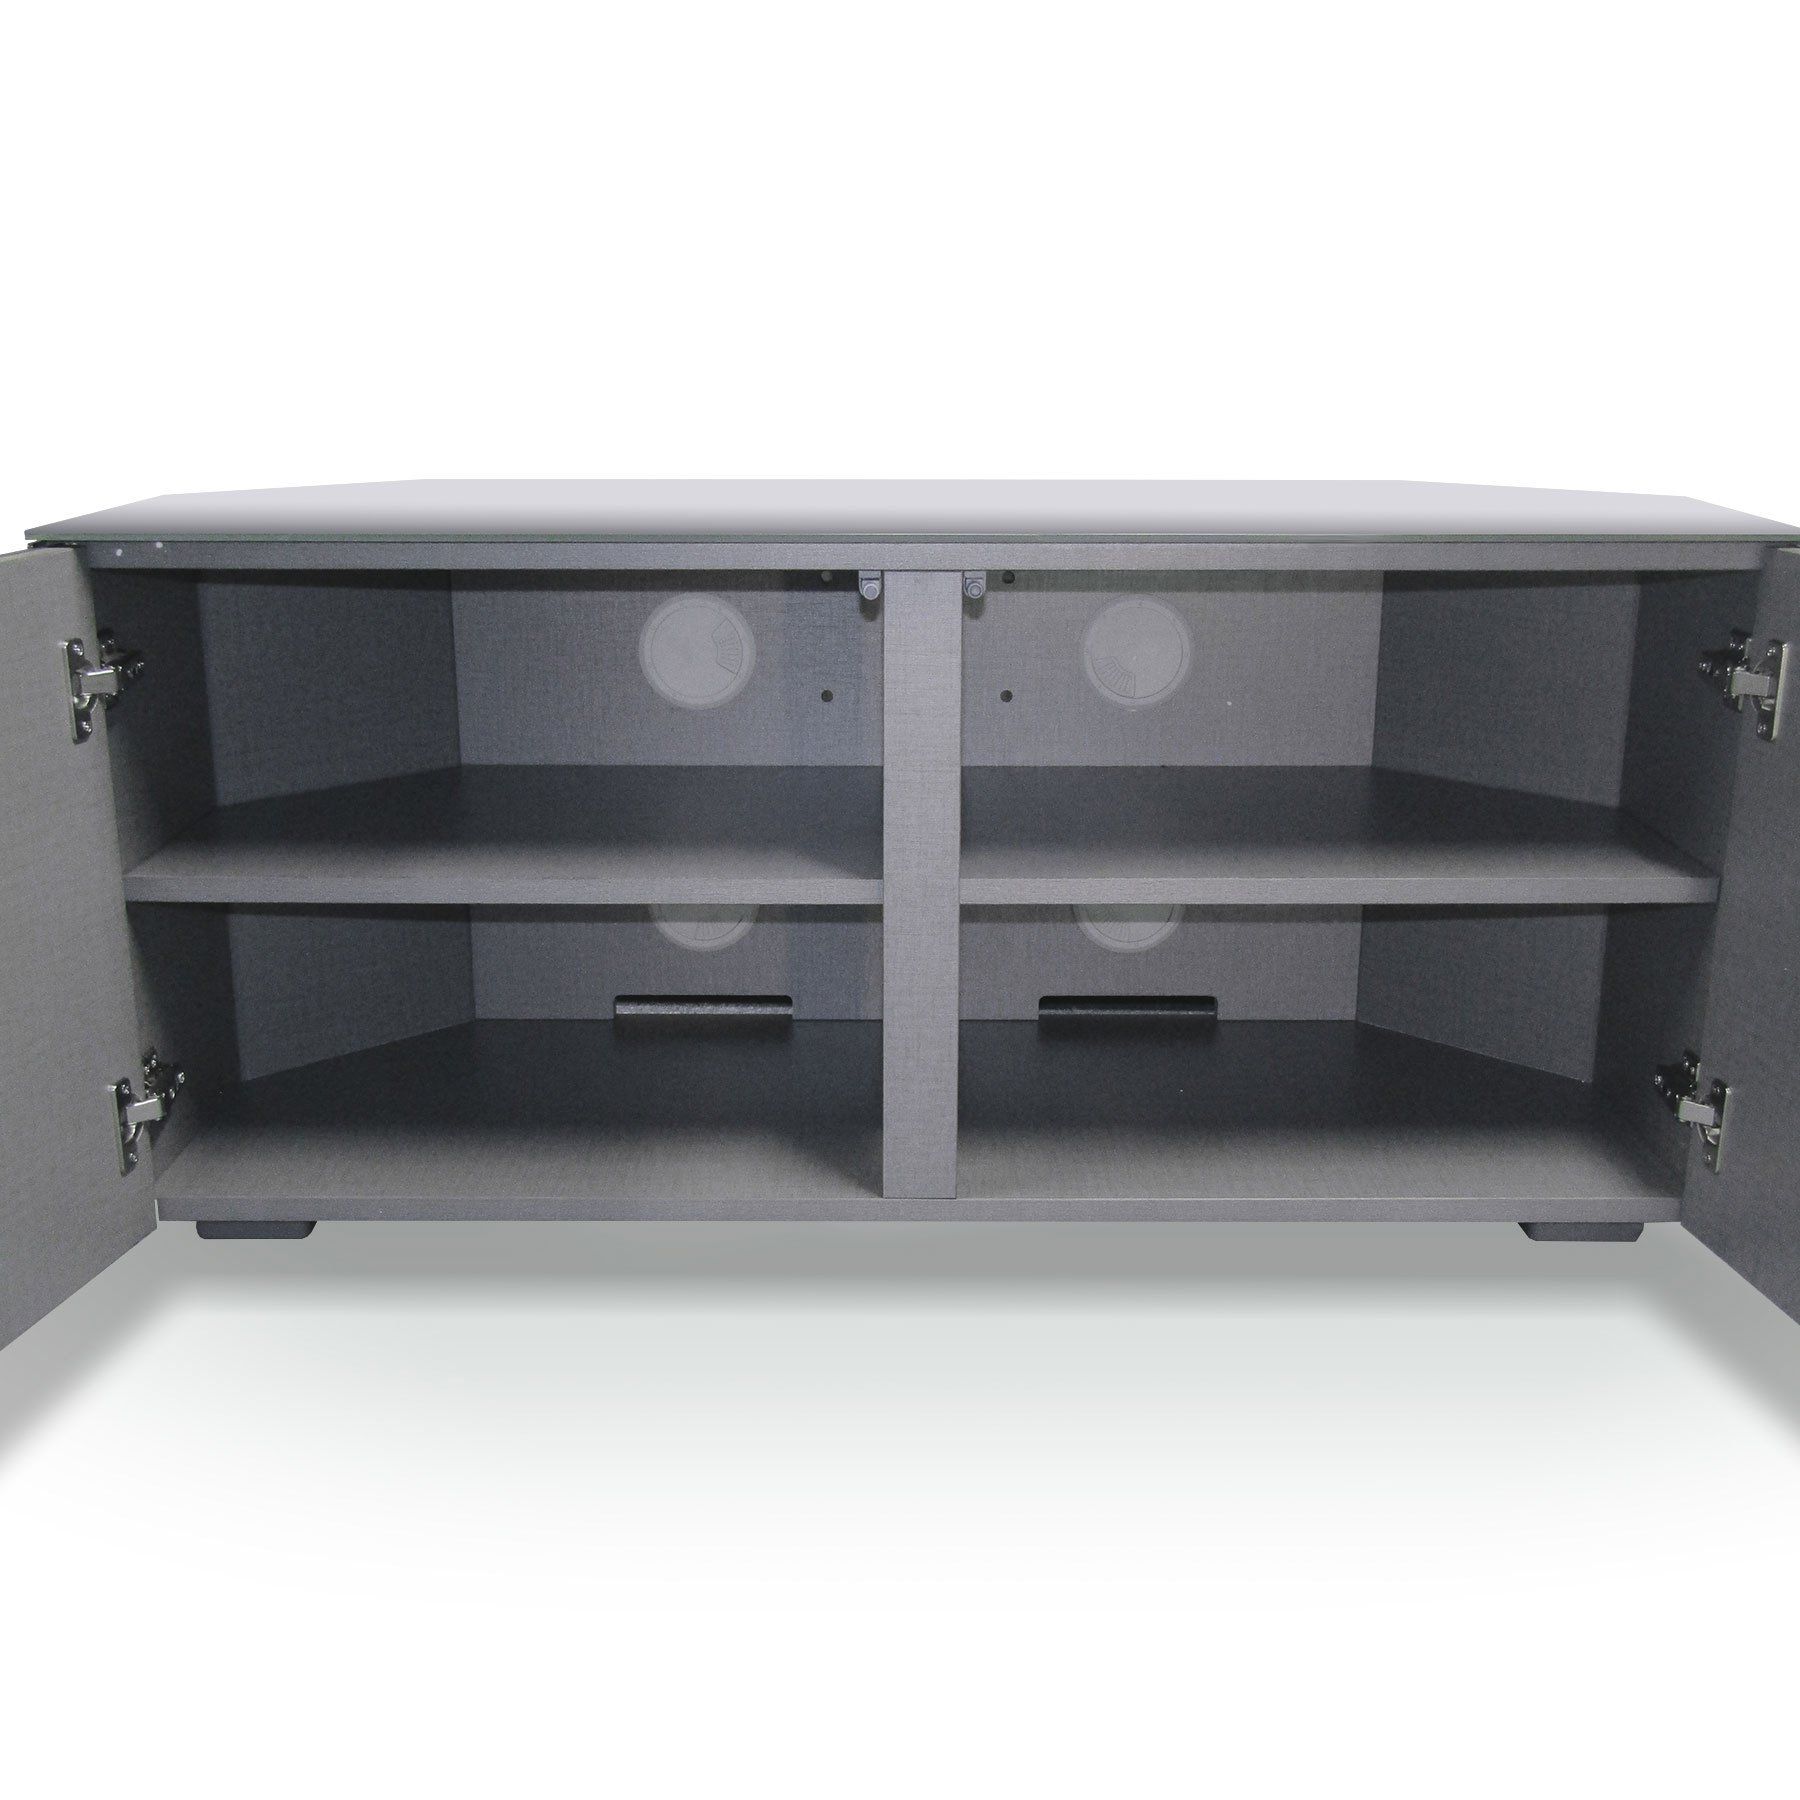 Invictus Black High Gloss Corner Tv Stand For Up To 55" Tvs Inside Tv Cabinets Black High Gloss (View 8 of 15)